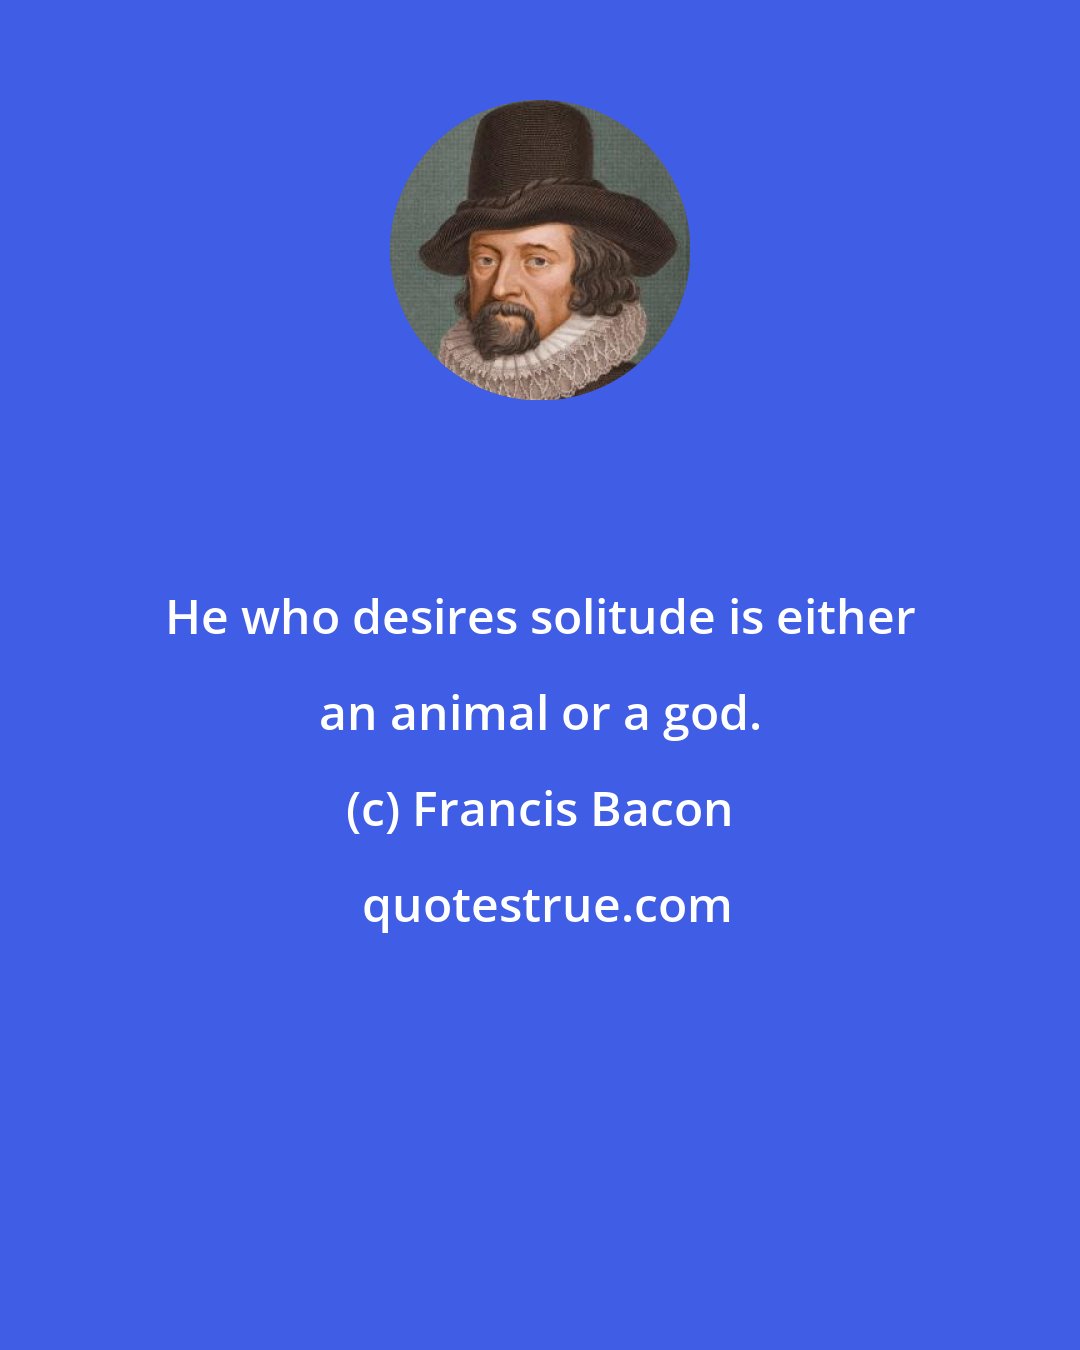 Francis Bacon: He who desires solitude is either an animal or a god.